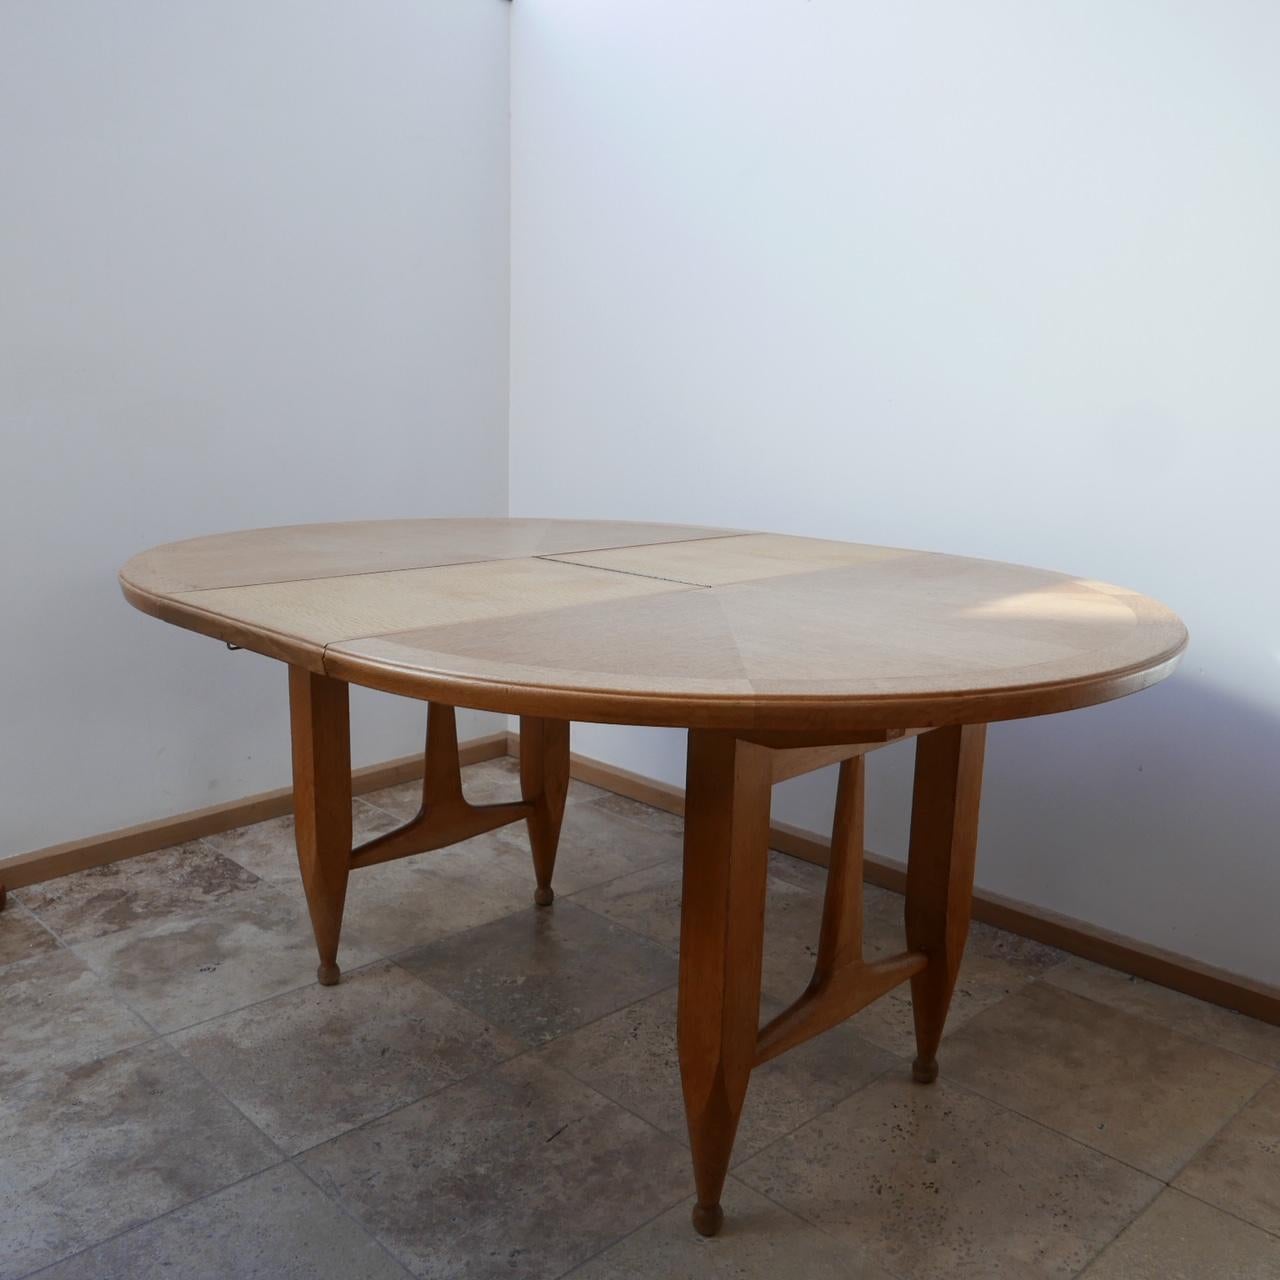 An adjustable dining table by design legends Guillerme et Chambron. 

France, c1970s. 

One extendable leaf that folds out on brass hinges. 

Good vintage condition. 

Dimensions: 120 L x 74 H x 120 W x 157 L when extended. 

Delivery: